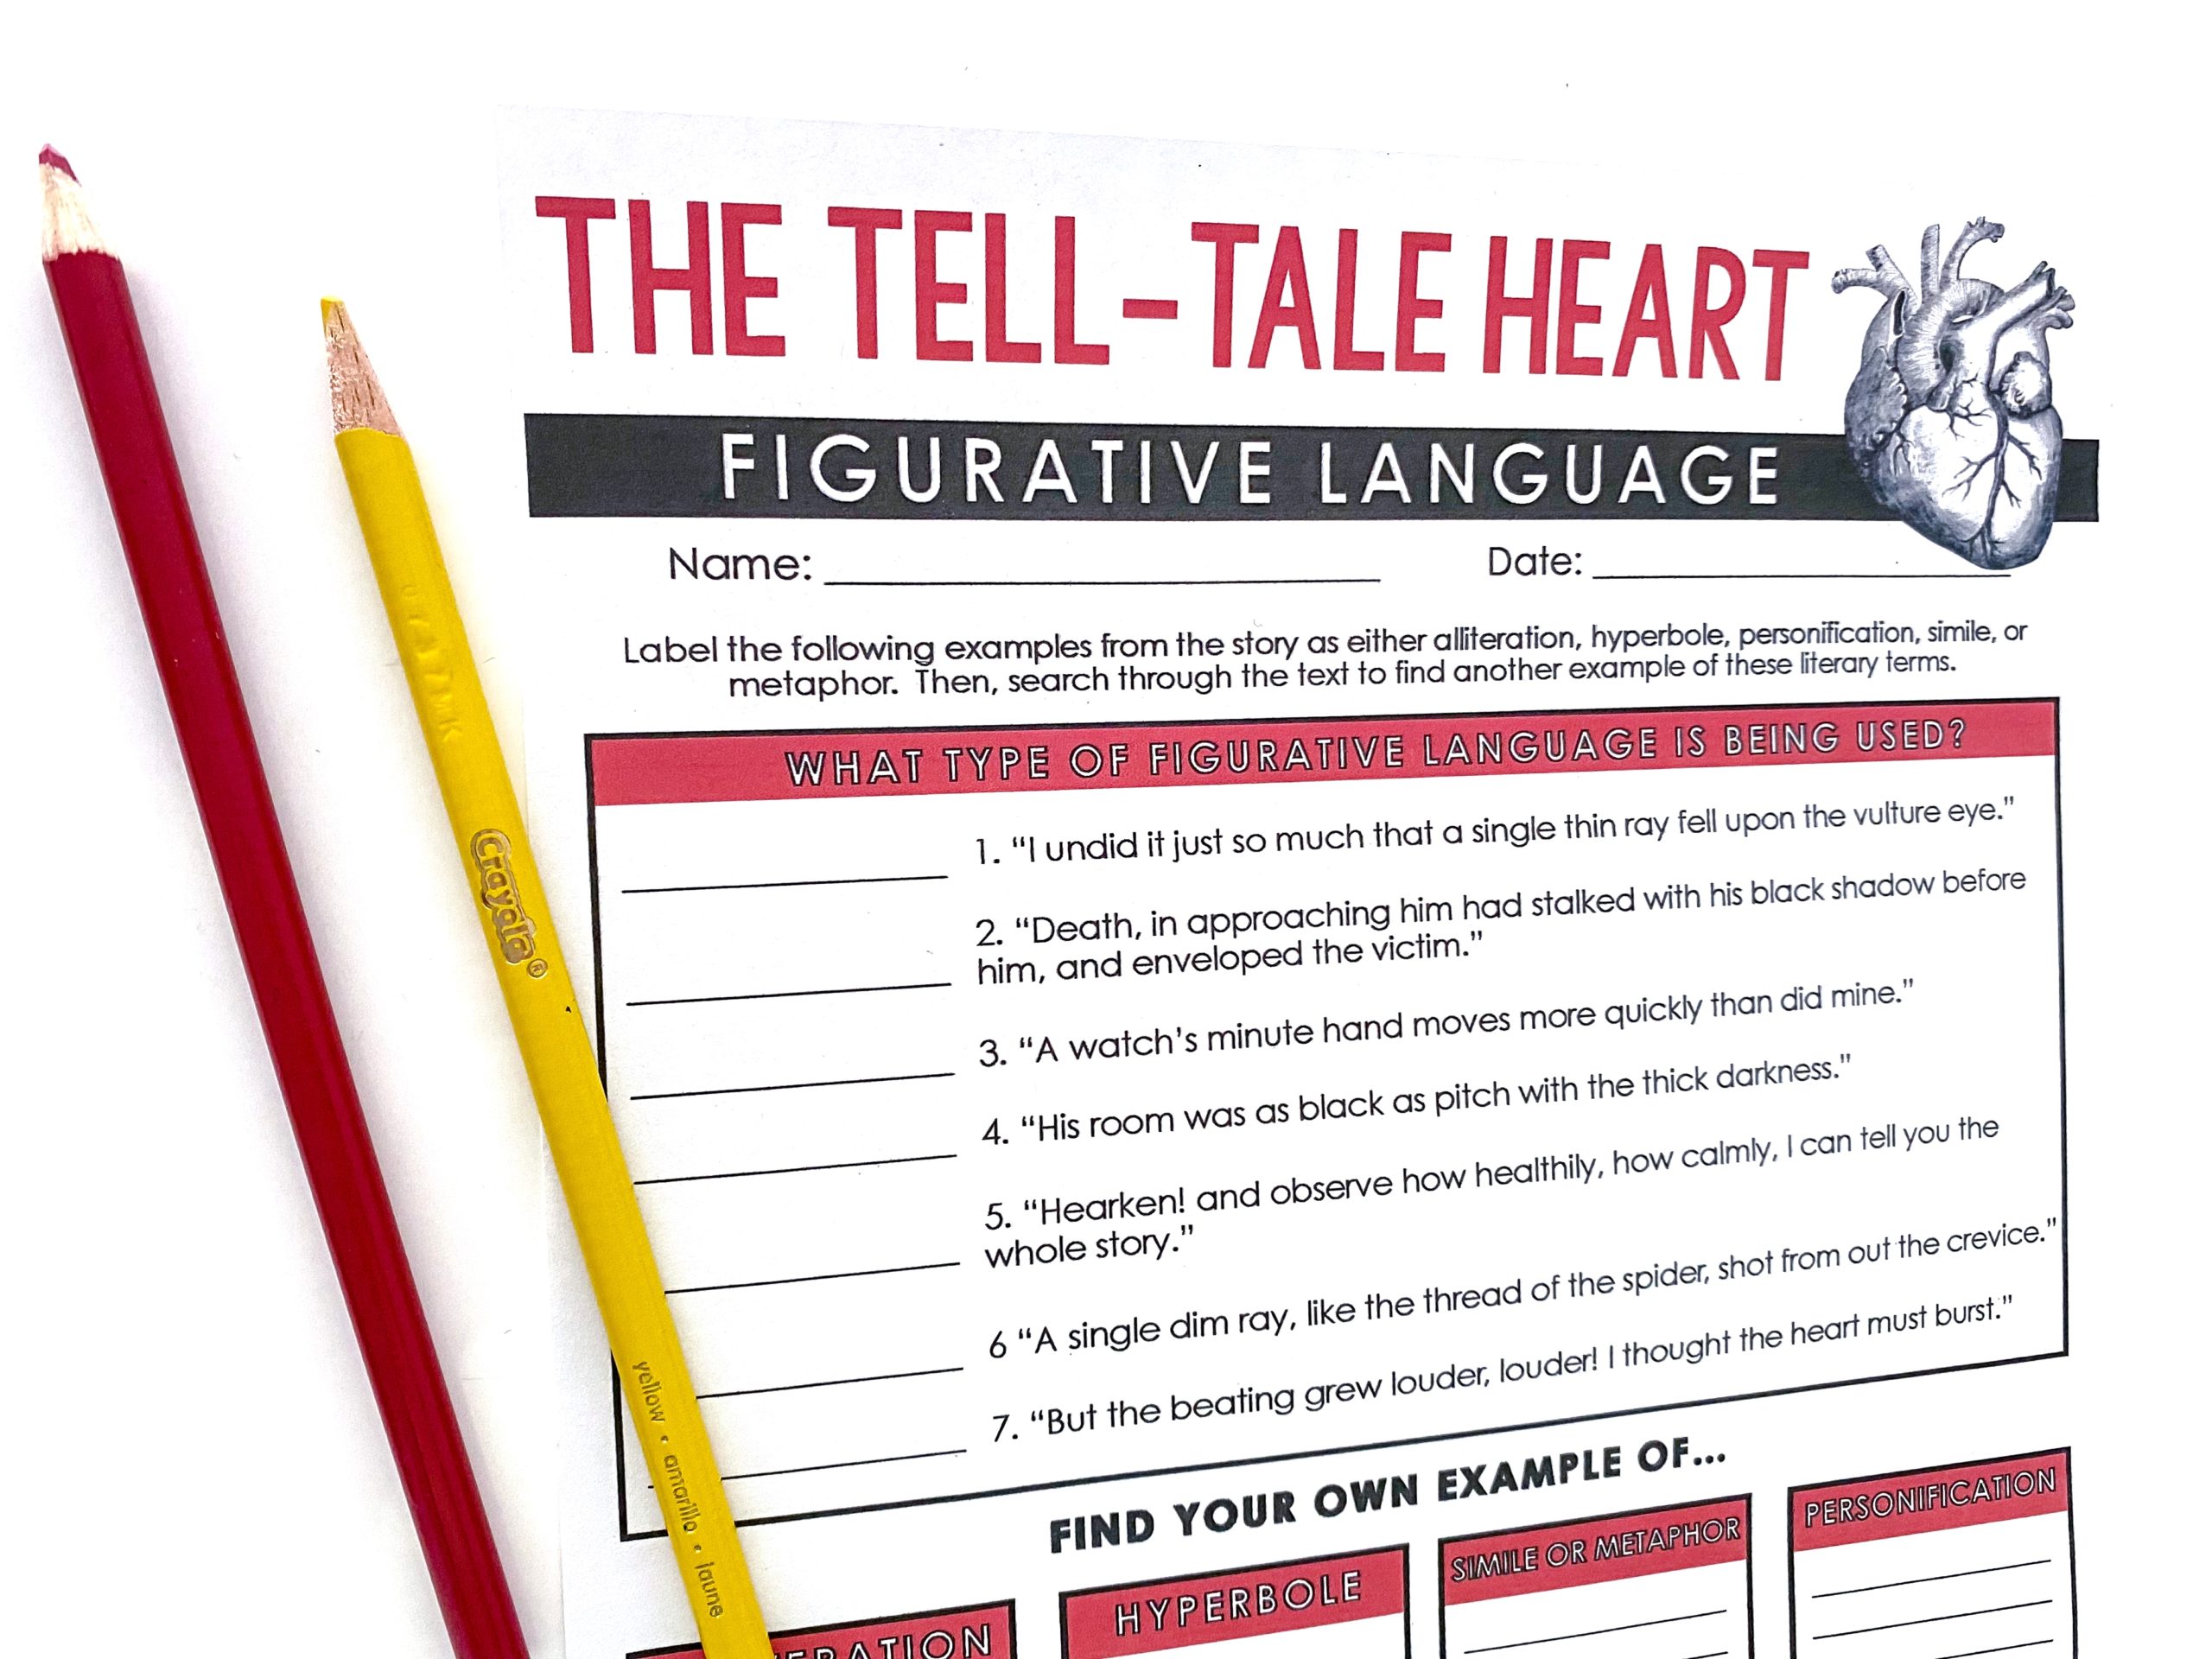 Figurative Language Activity for The Tell-Tale Heart